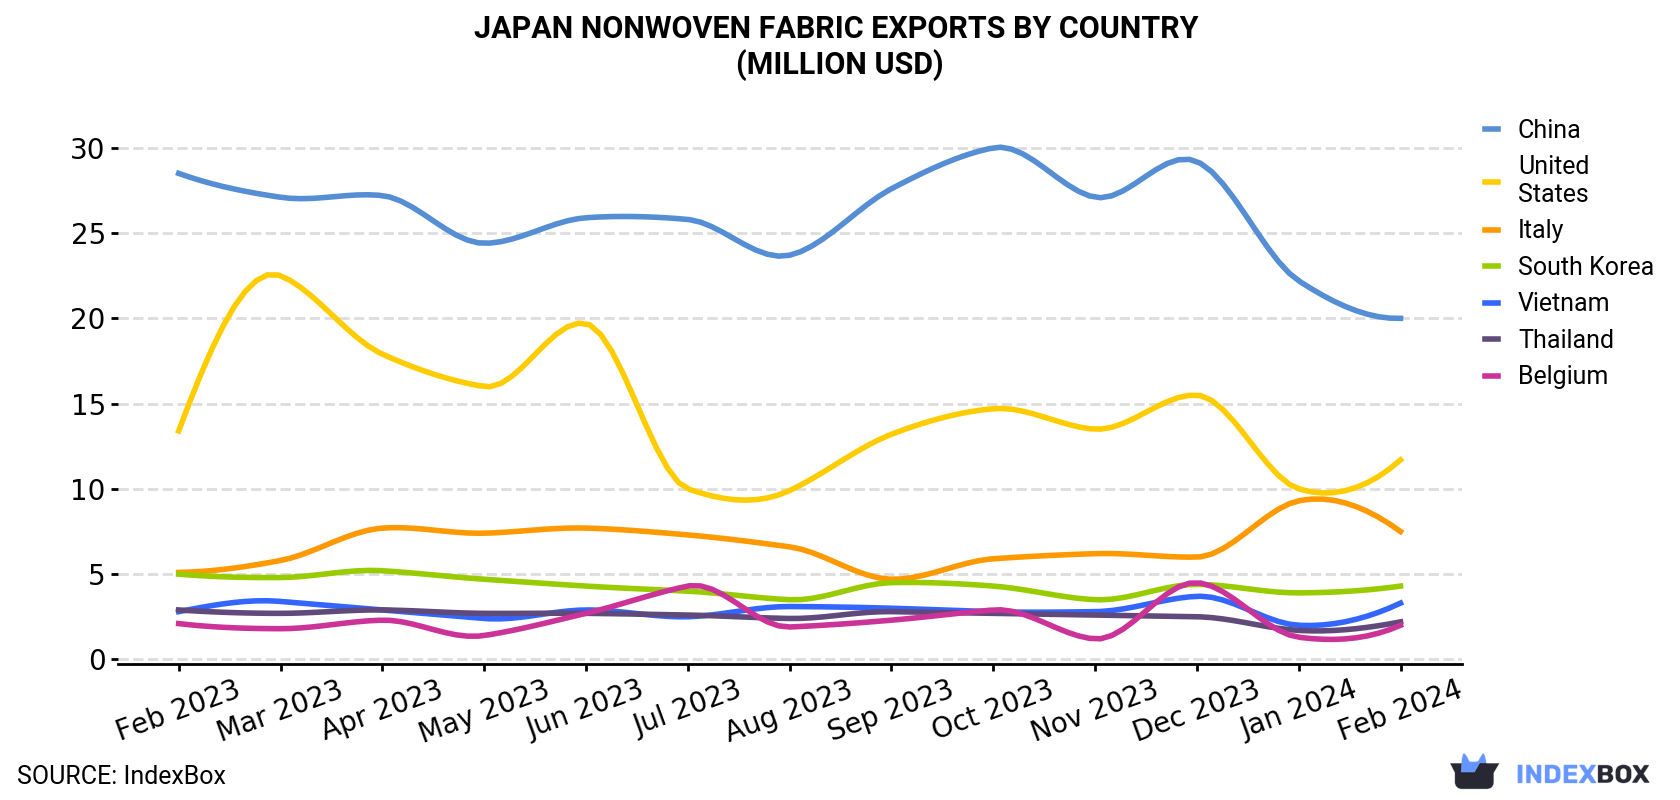 Japan Nonwoven Fabric Exports By Country (Million USD)